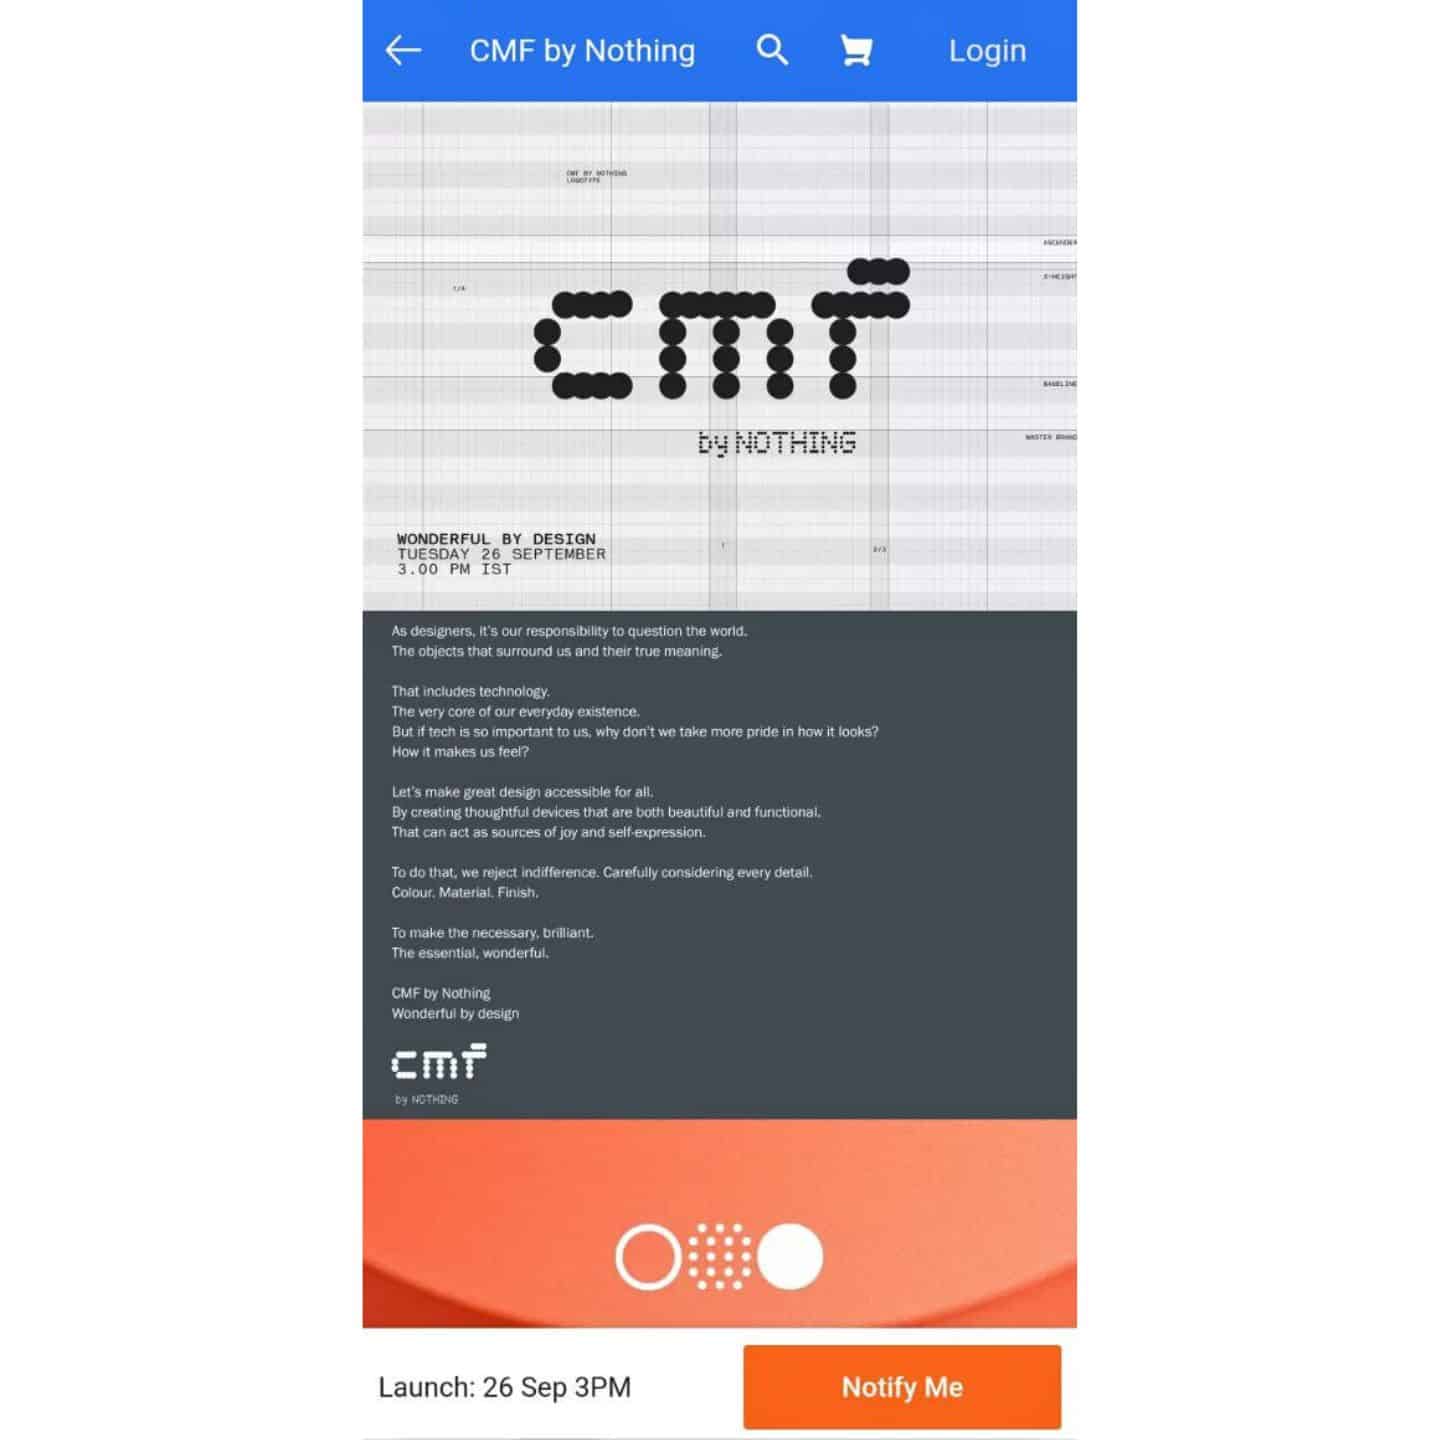 Introducing CMF by Nothing: Making Great Design Accessible 